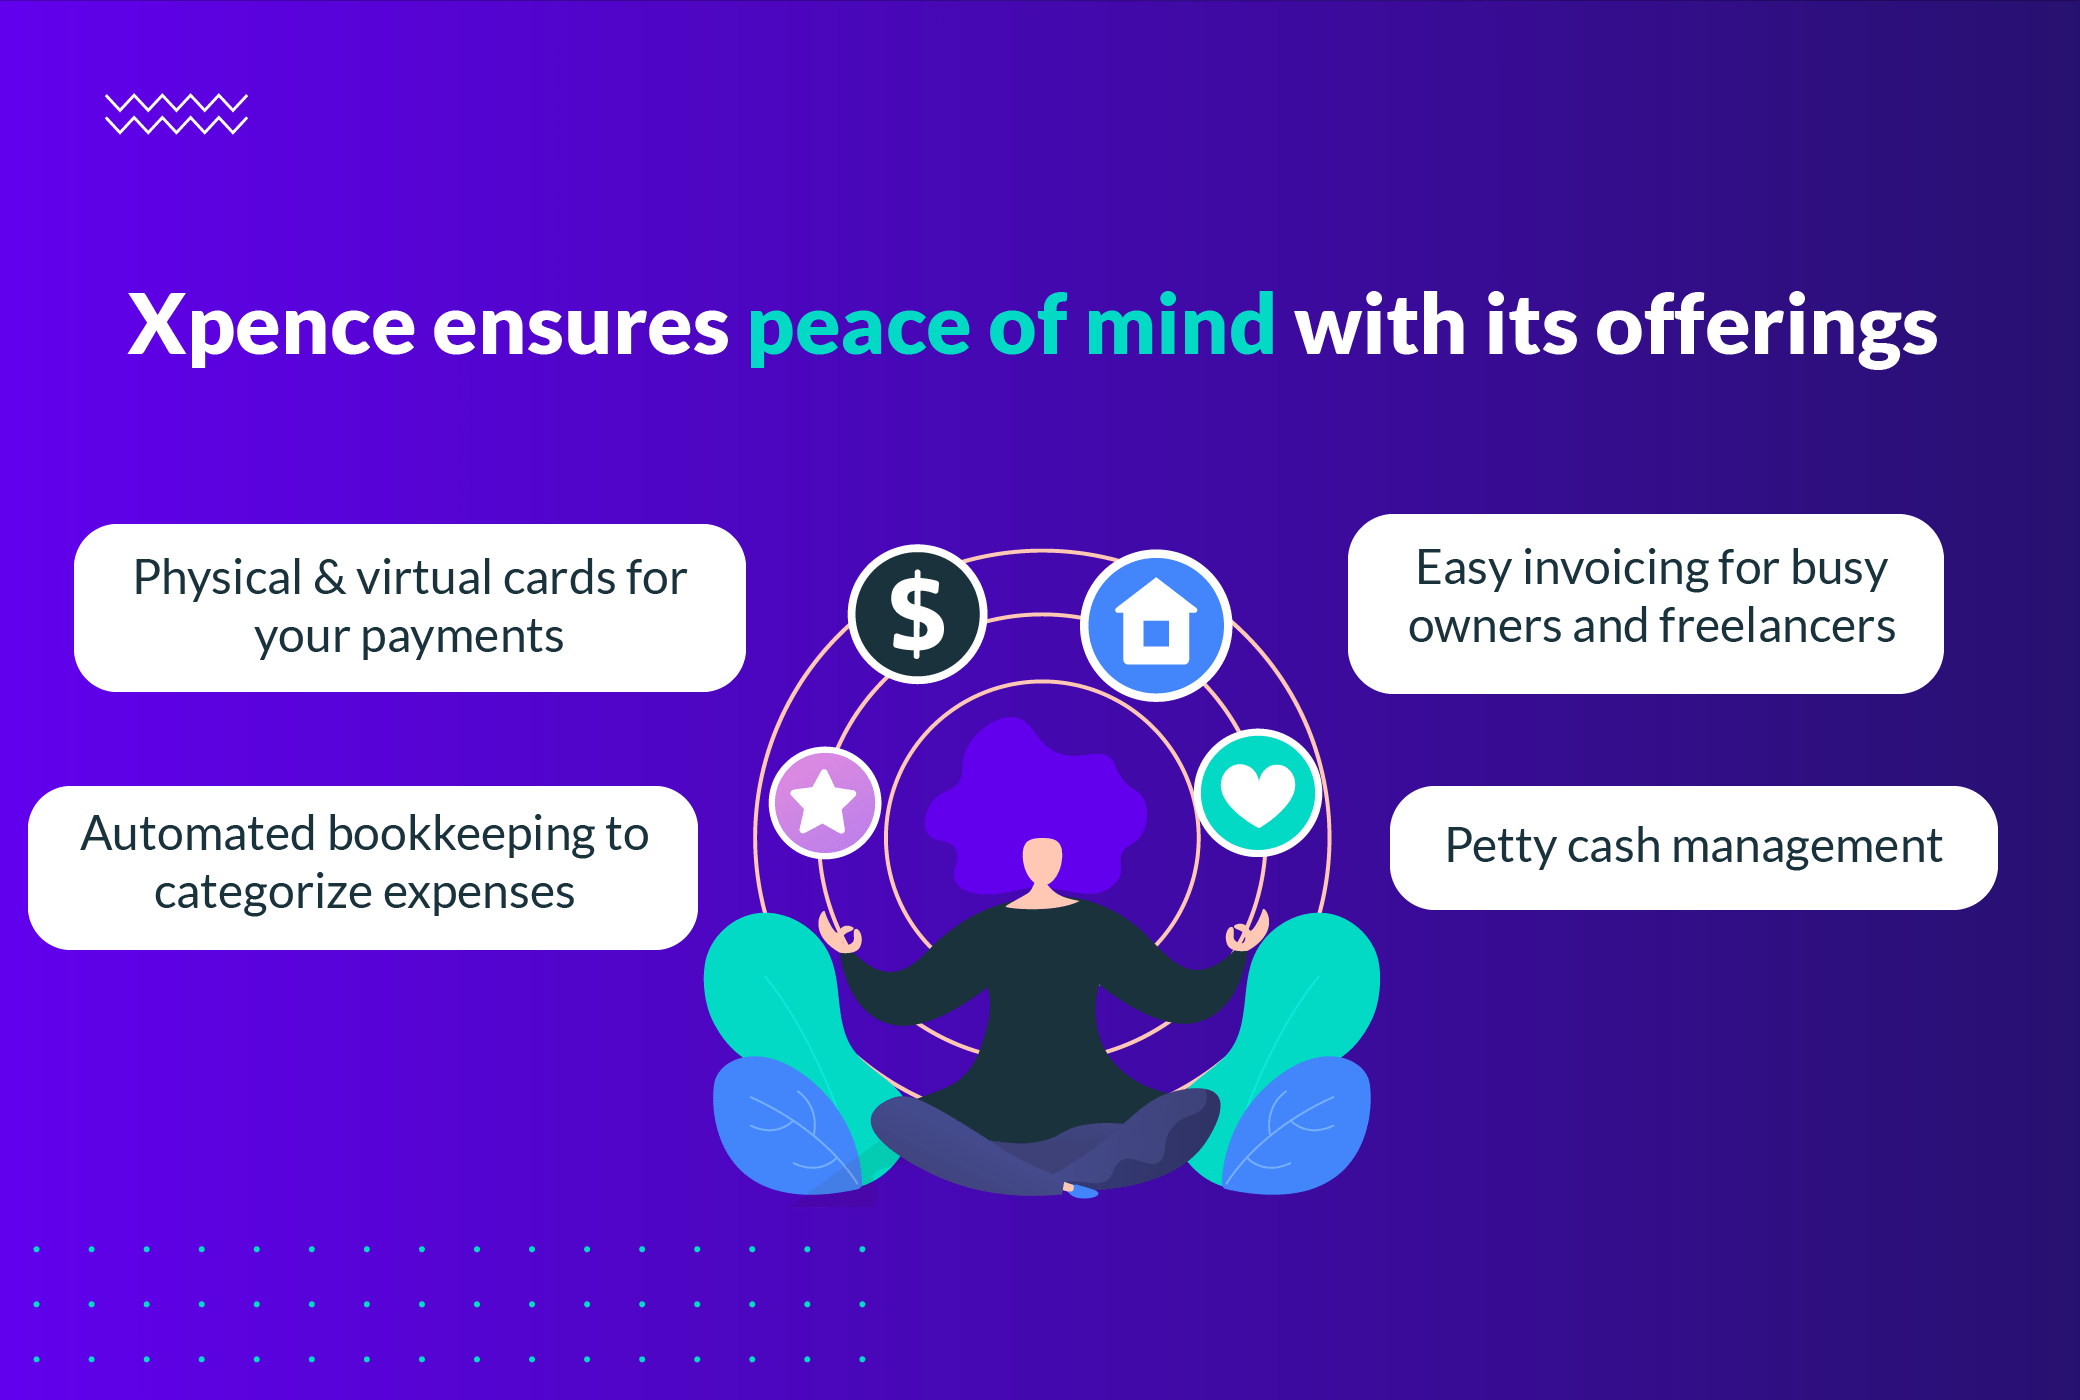 Using Xpence for Your Business Can Give You Peace of Mind